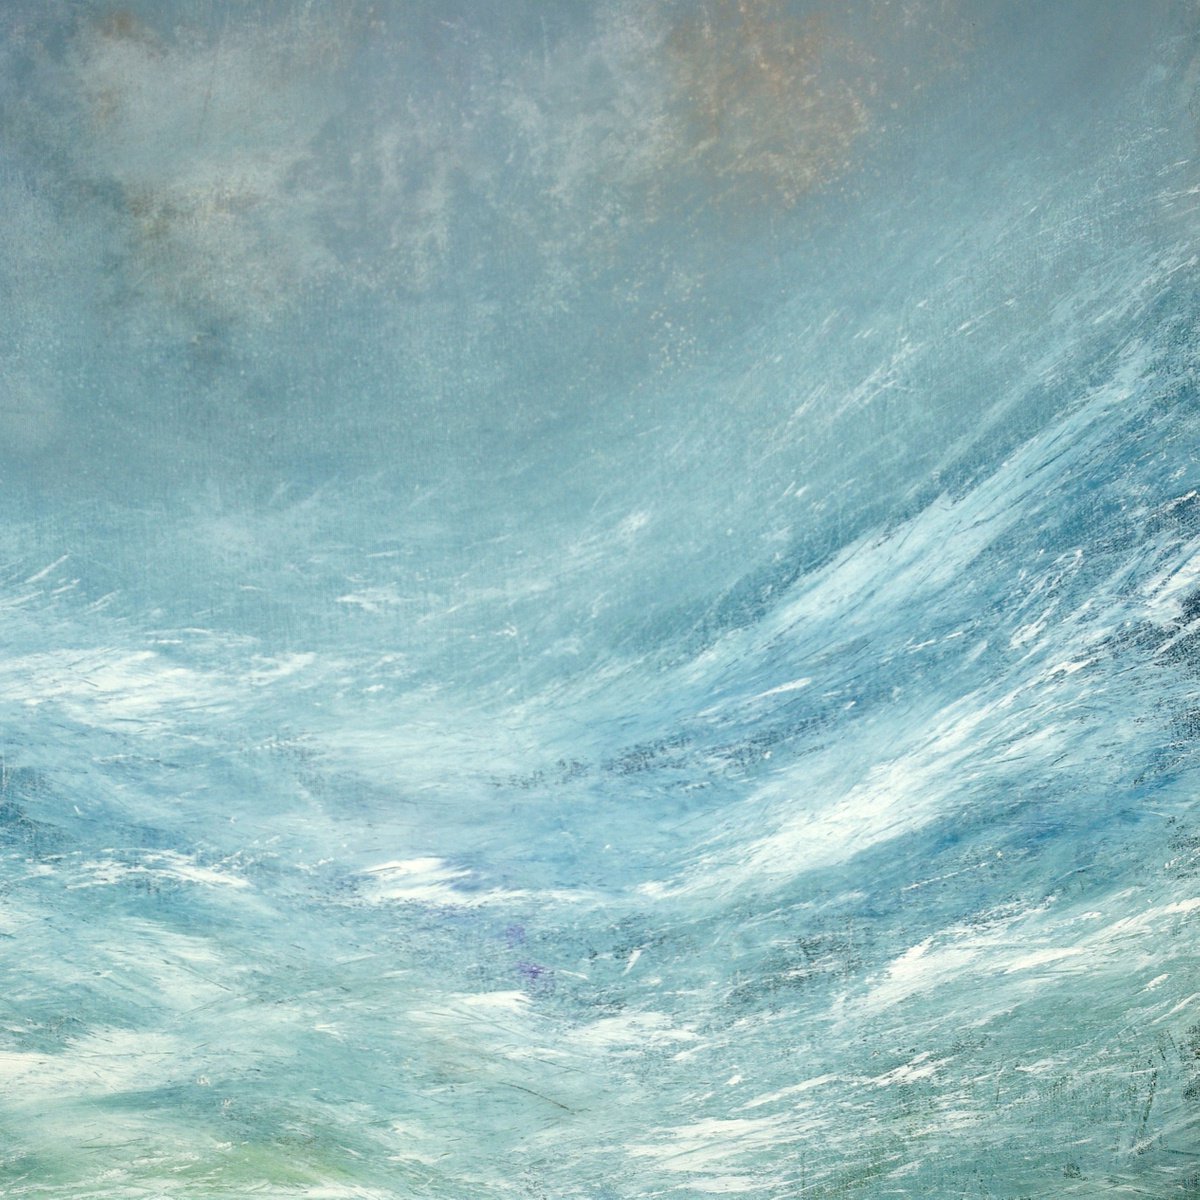 Swell, seascape by oconnart